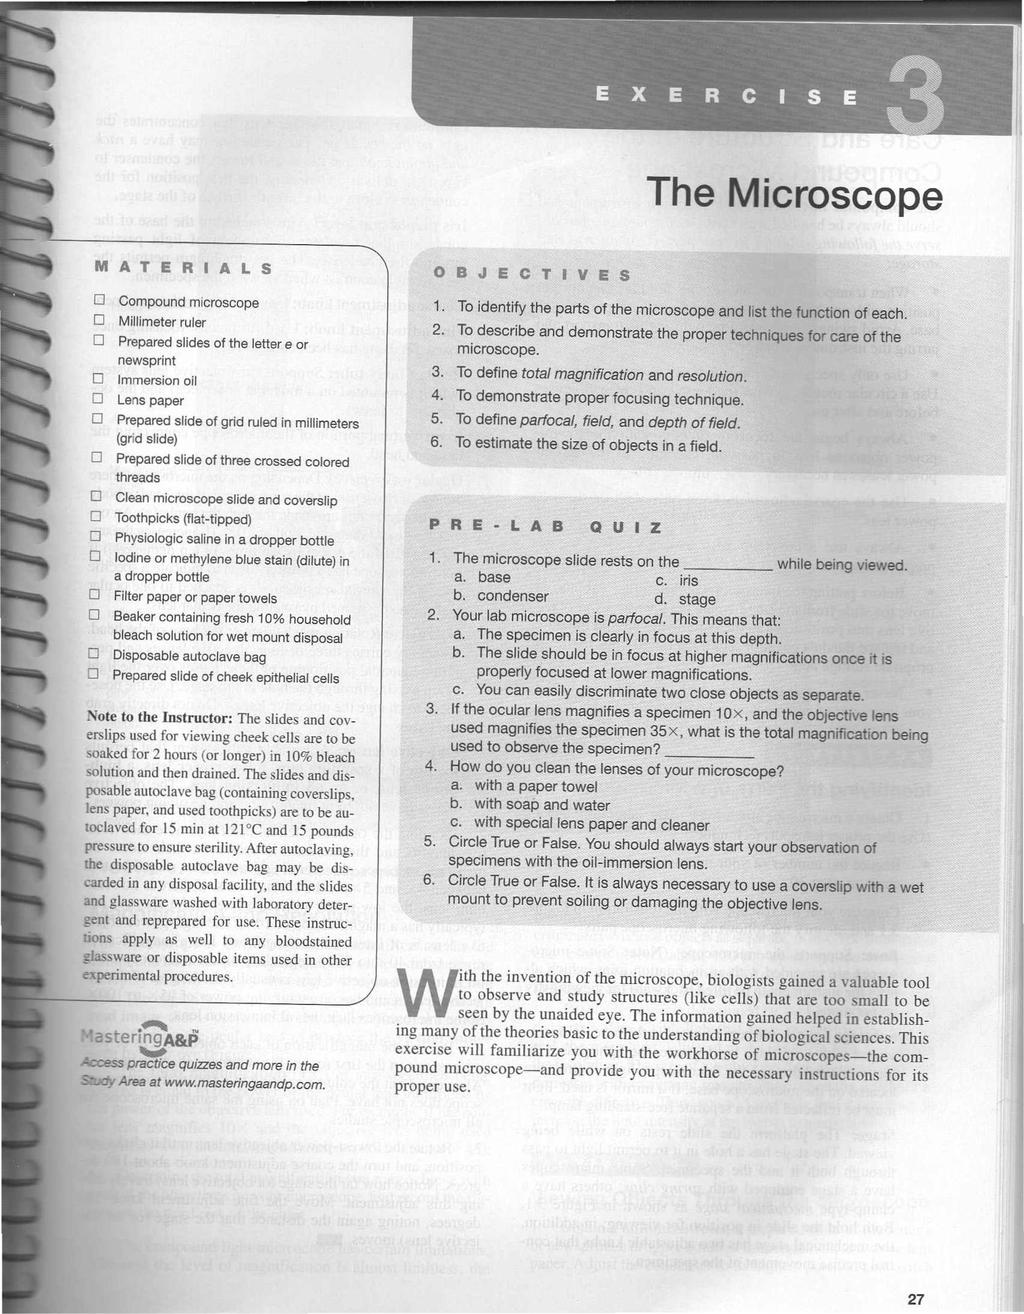 The Microscope MATERIALS o Compound microscope o Millimeter ruler o Prepared slides of the letter e or newsprint o Immersion oil o Lens paper o Prepared slide of grid ruled in millimeters (grid